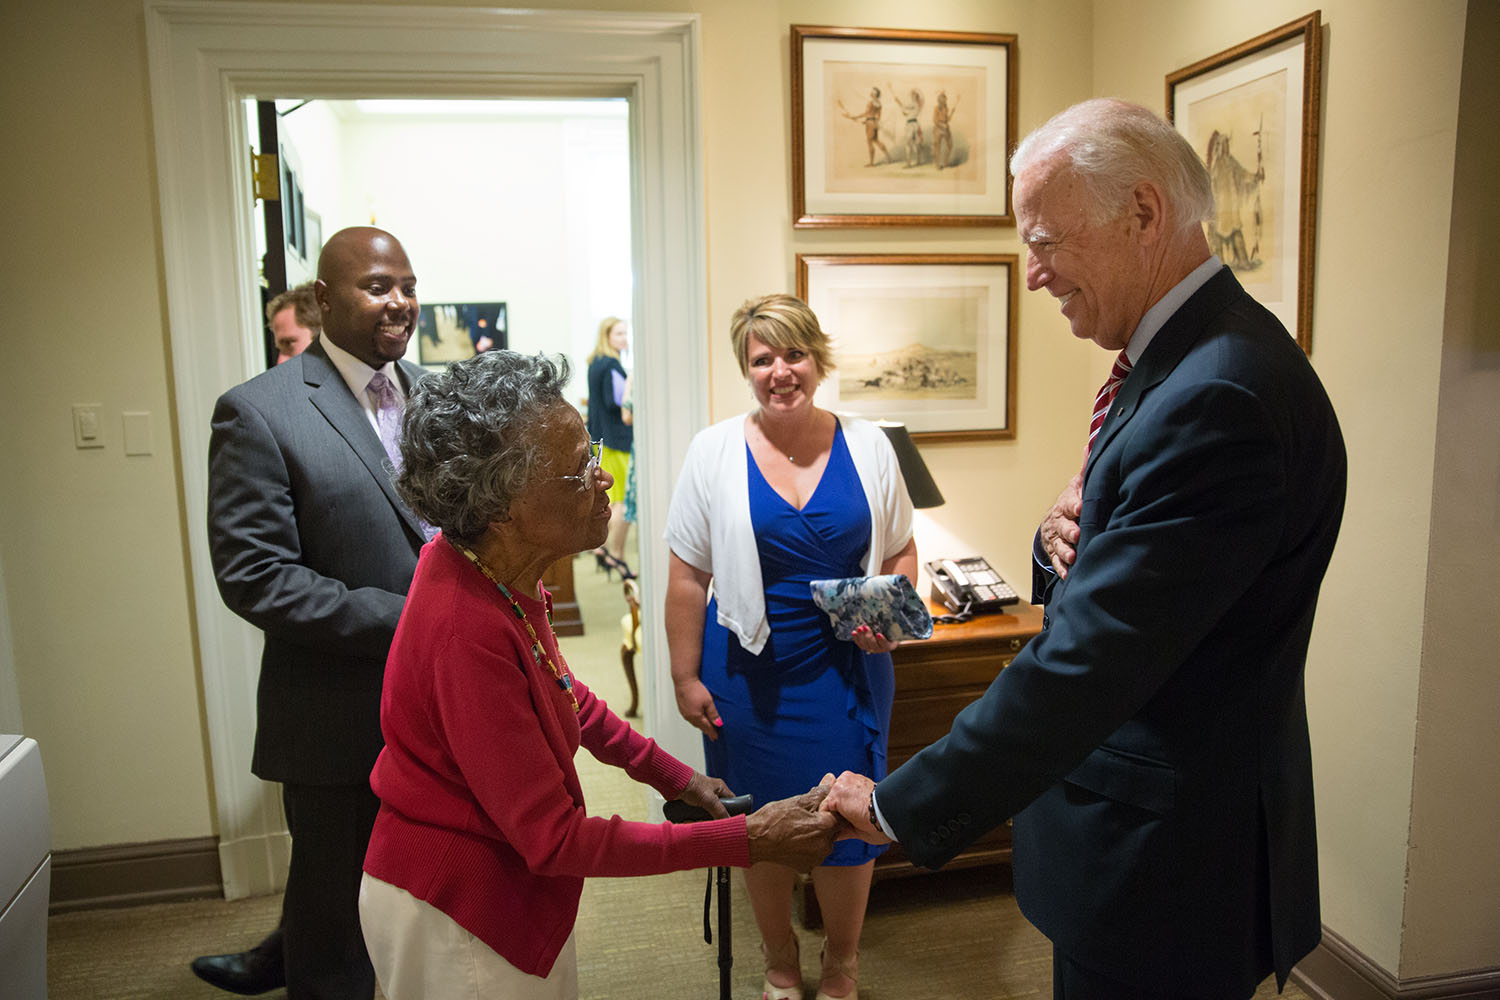 PHOTO: Vice President Joe Biden says goodbye to Vivian Bailey in the hallway outside his West Wing office, May 26, 2015.